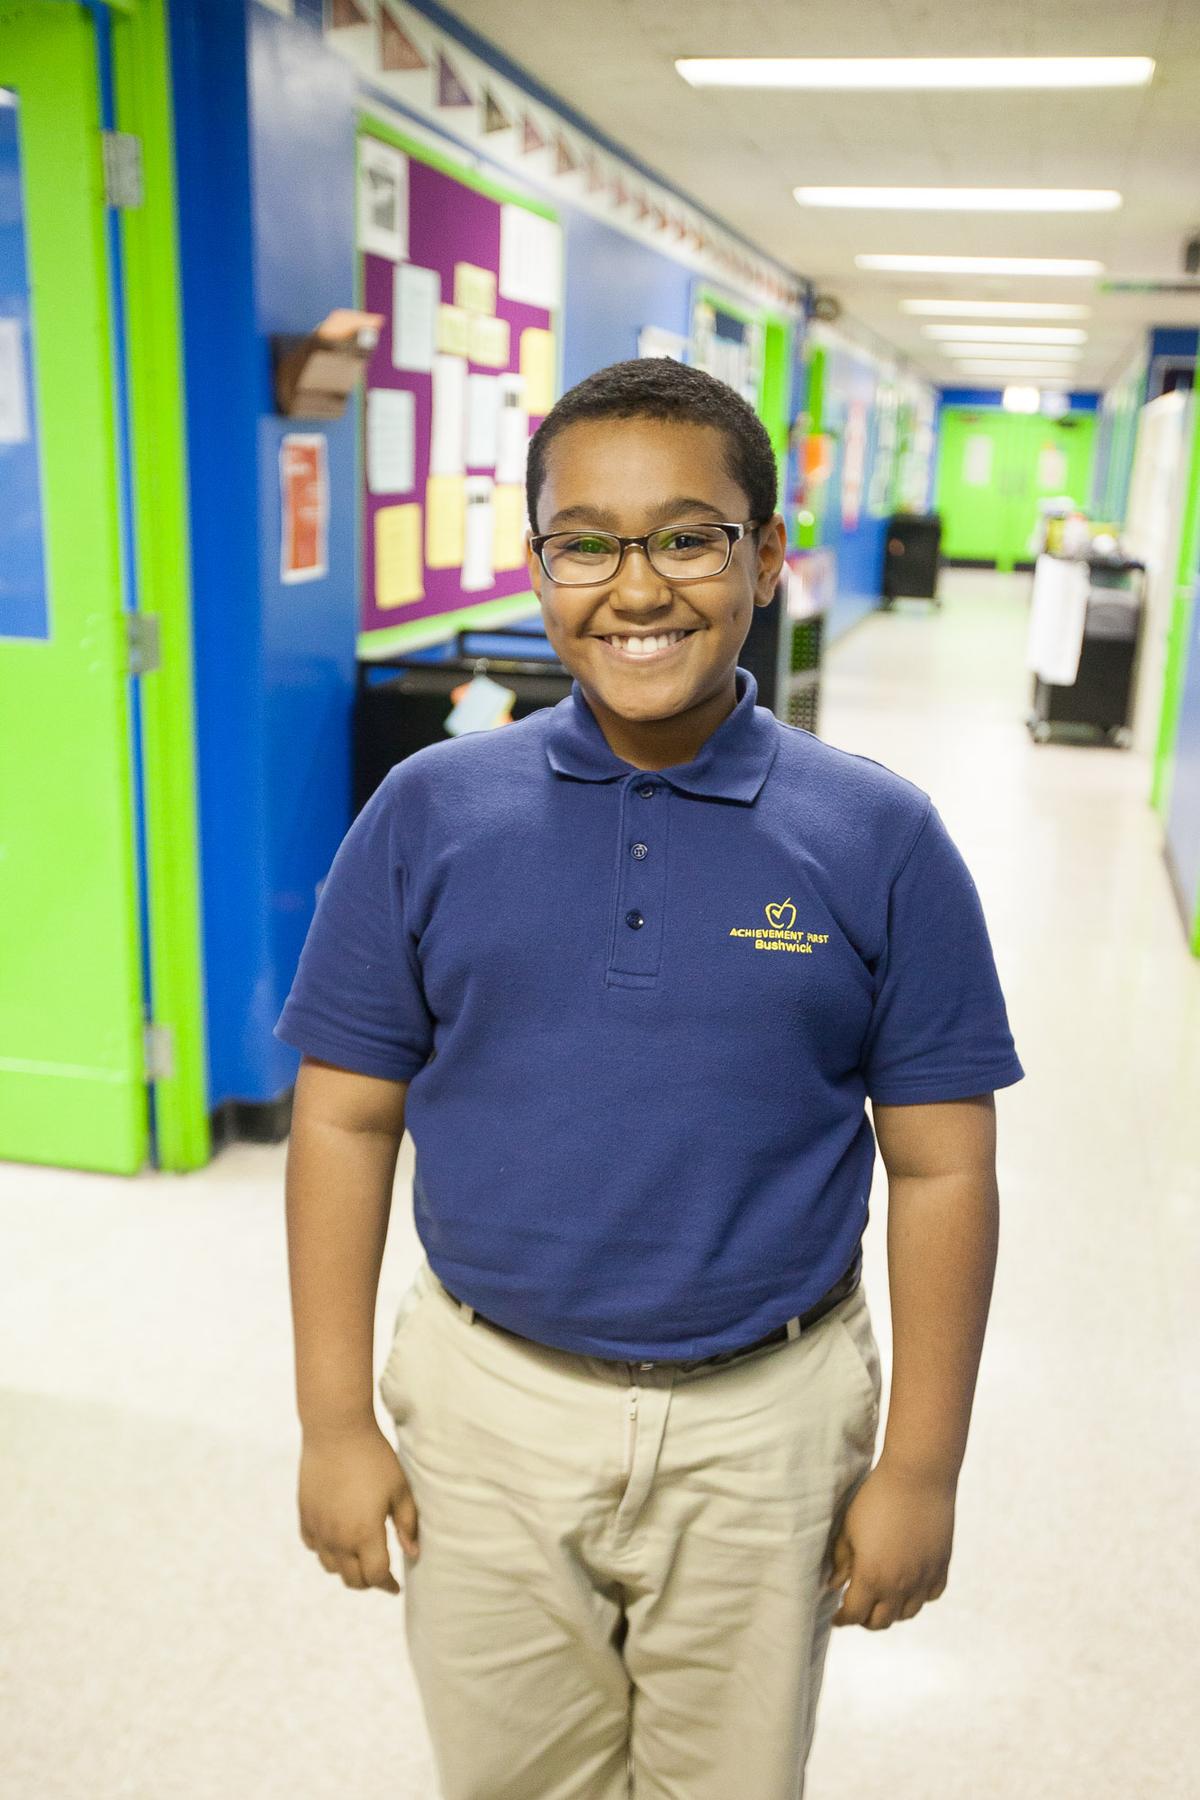 Fifth grade student Clive Campbell at Achievement First Charter School in Bushwick, Jan 30, 2014. (Petr Svab/Epoch Times)